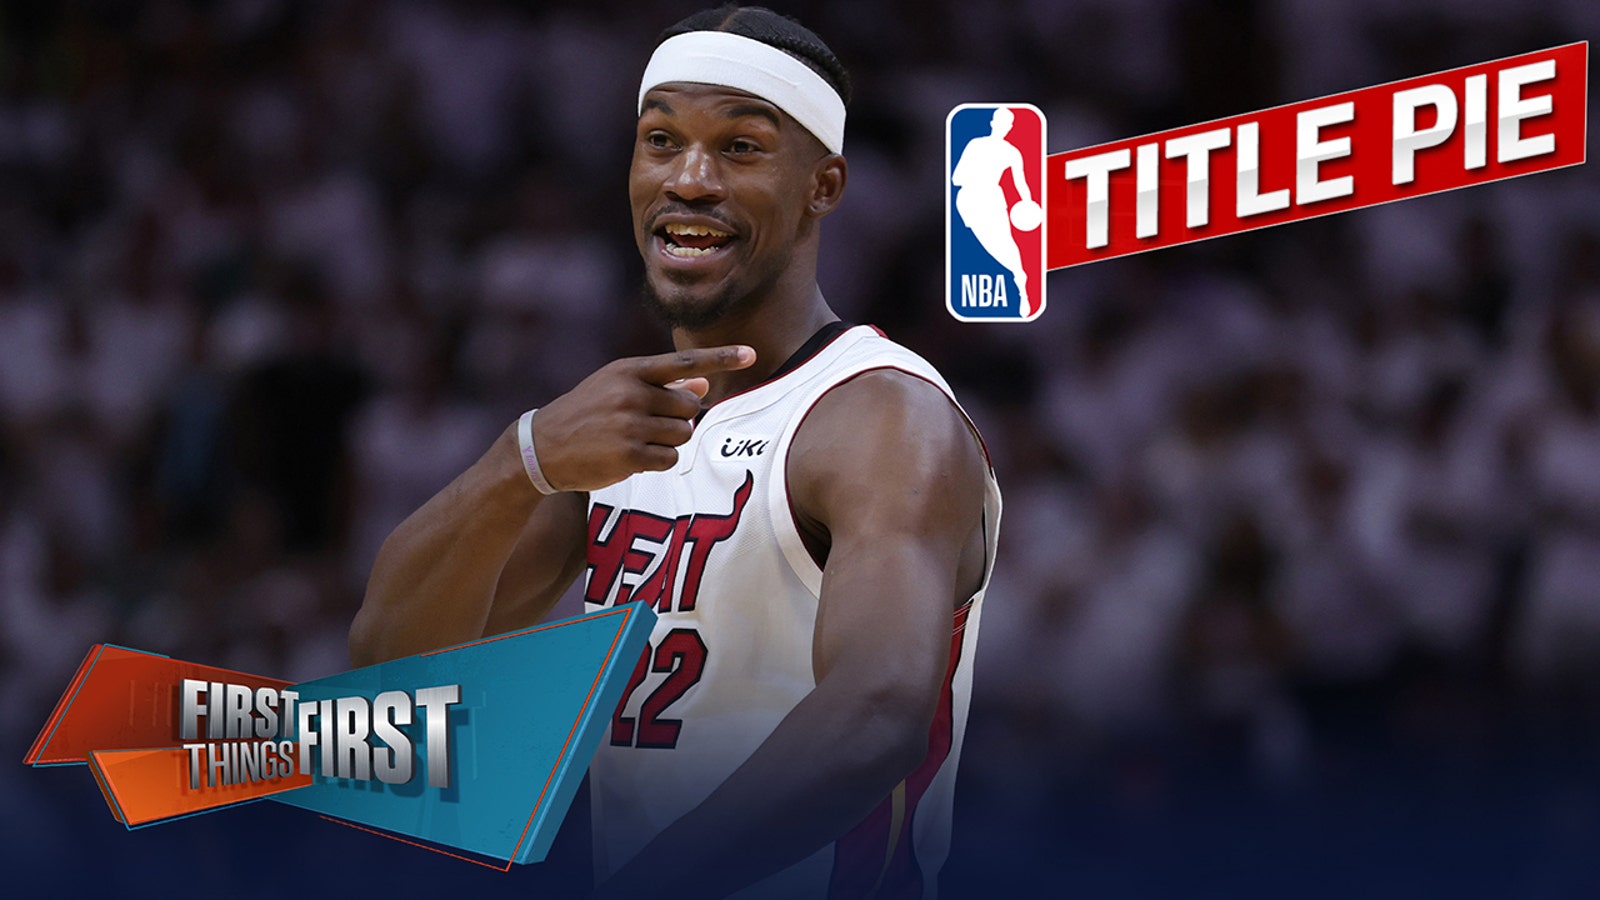 Jimmy Butler and the Heat beat the Nuggets in the last edition of the NBA Title Pie